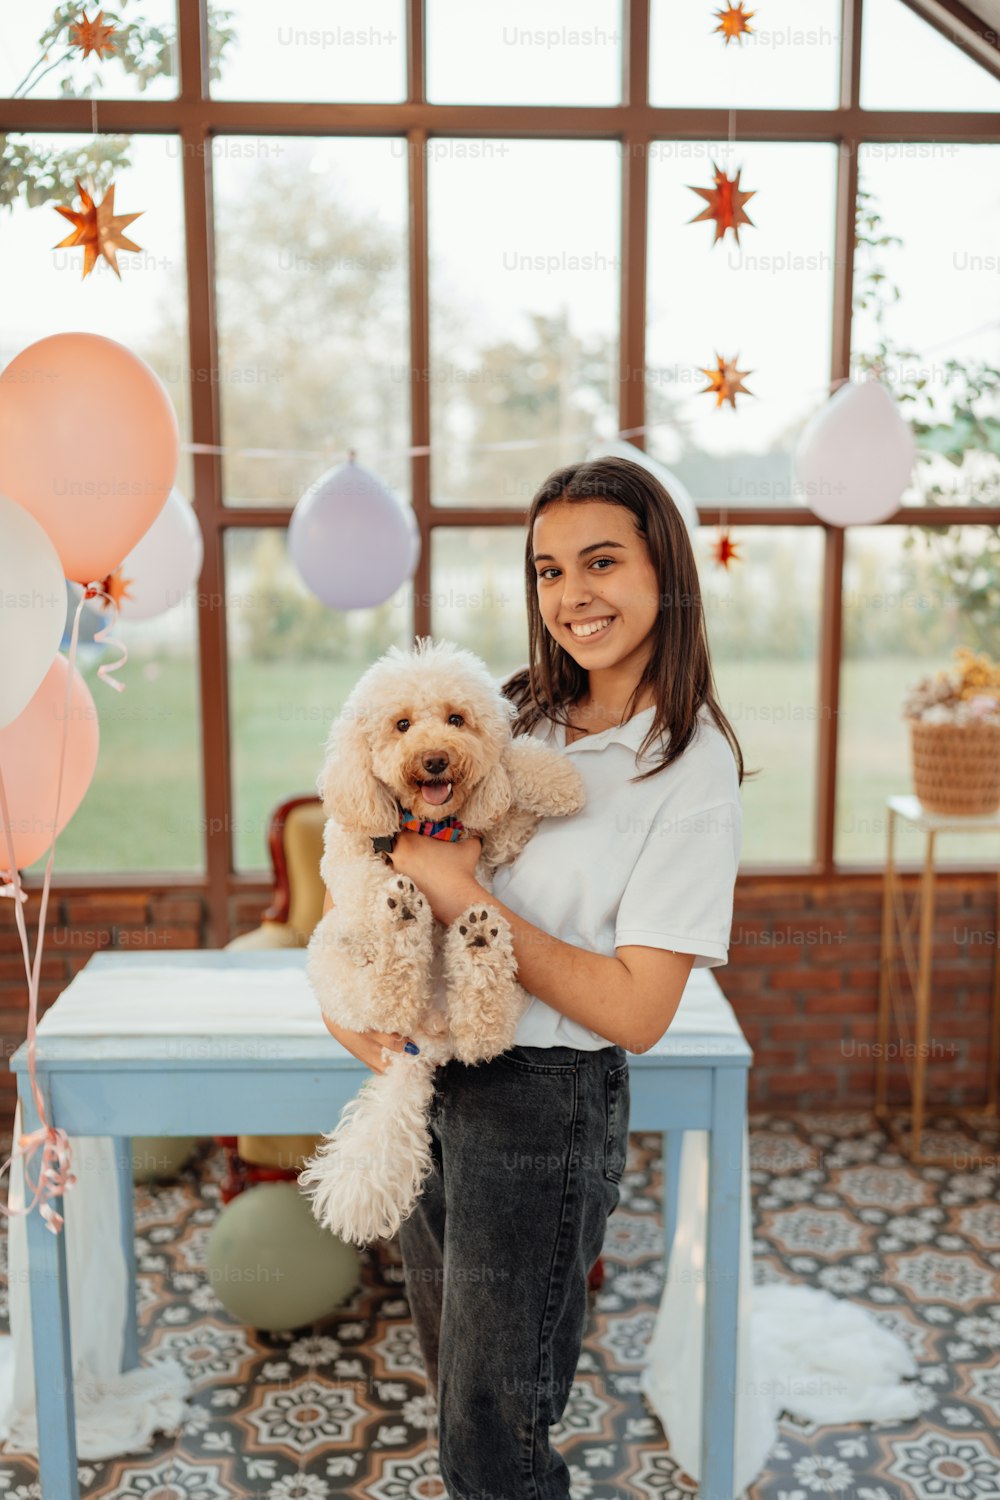 a woman holding a dog in front of balloons